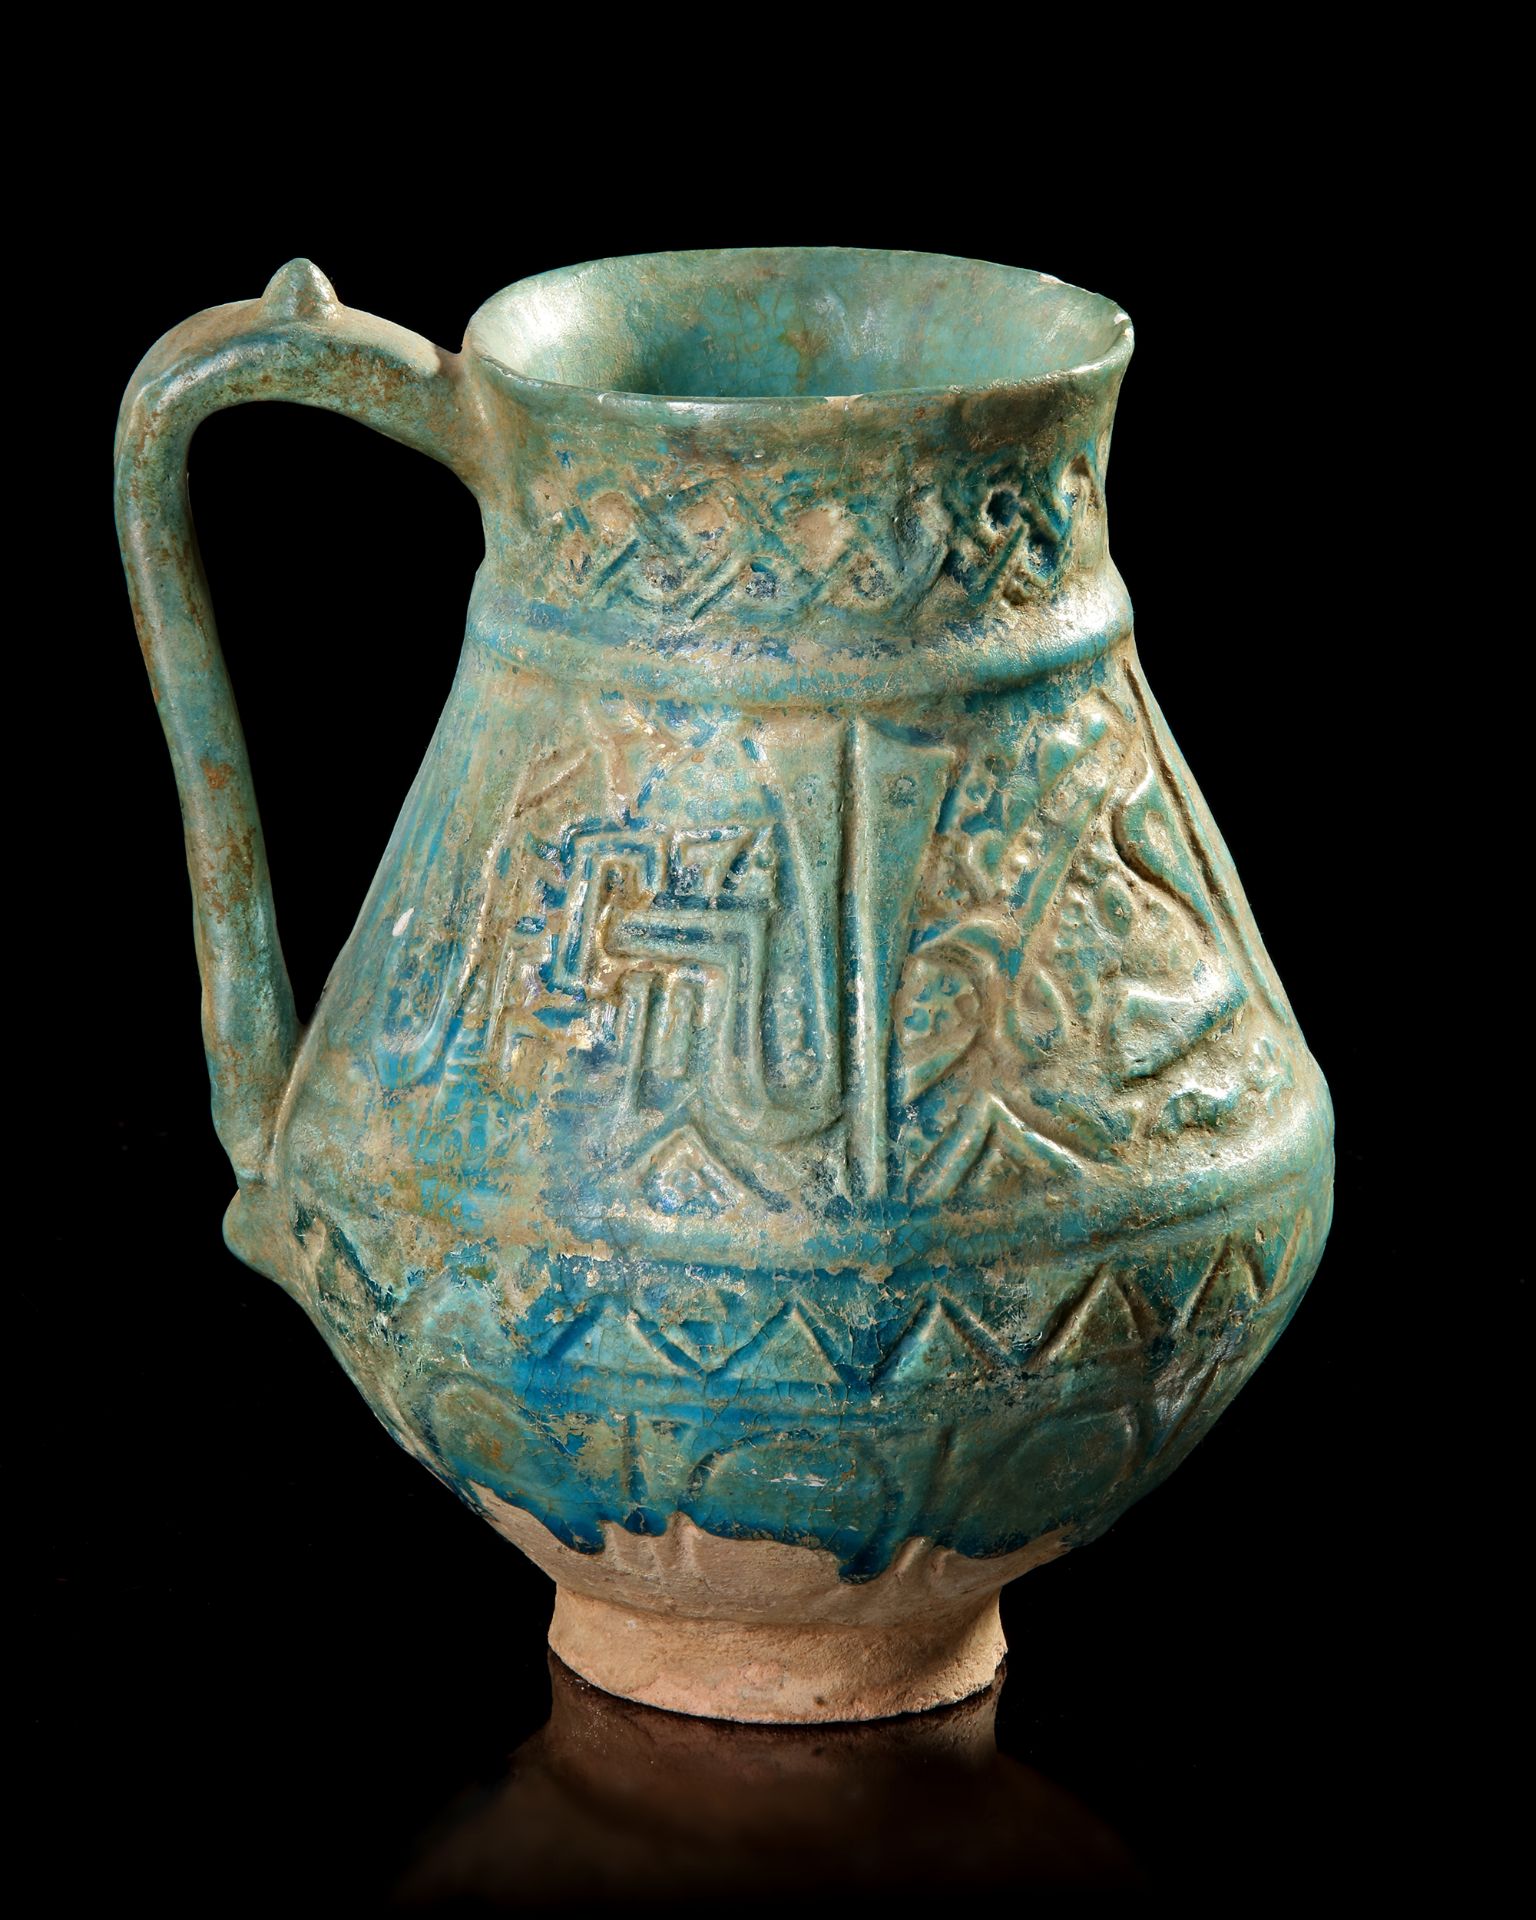 A TURQUOISE GLAZED POTTERY EWER, PROBABLY NISHAPUR, 12TH CENTURY - Image 6 of 8